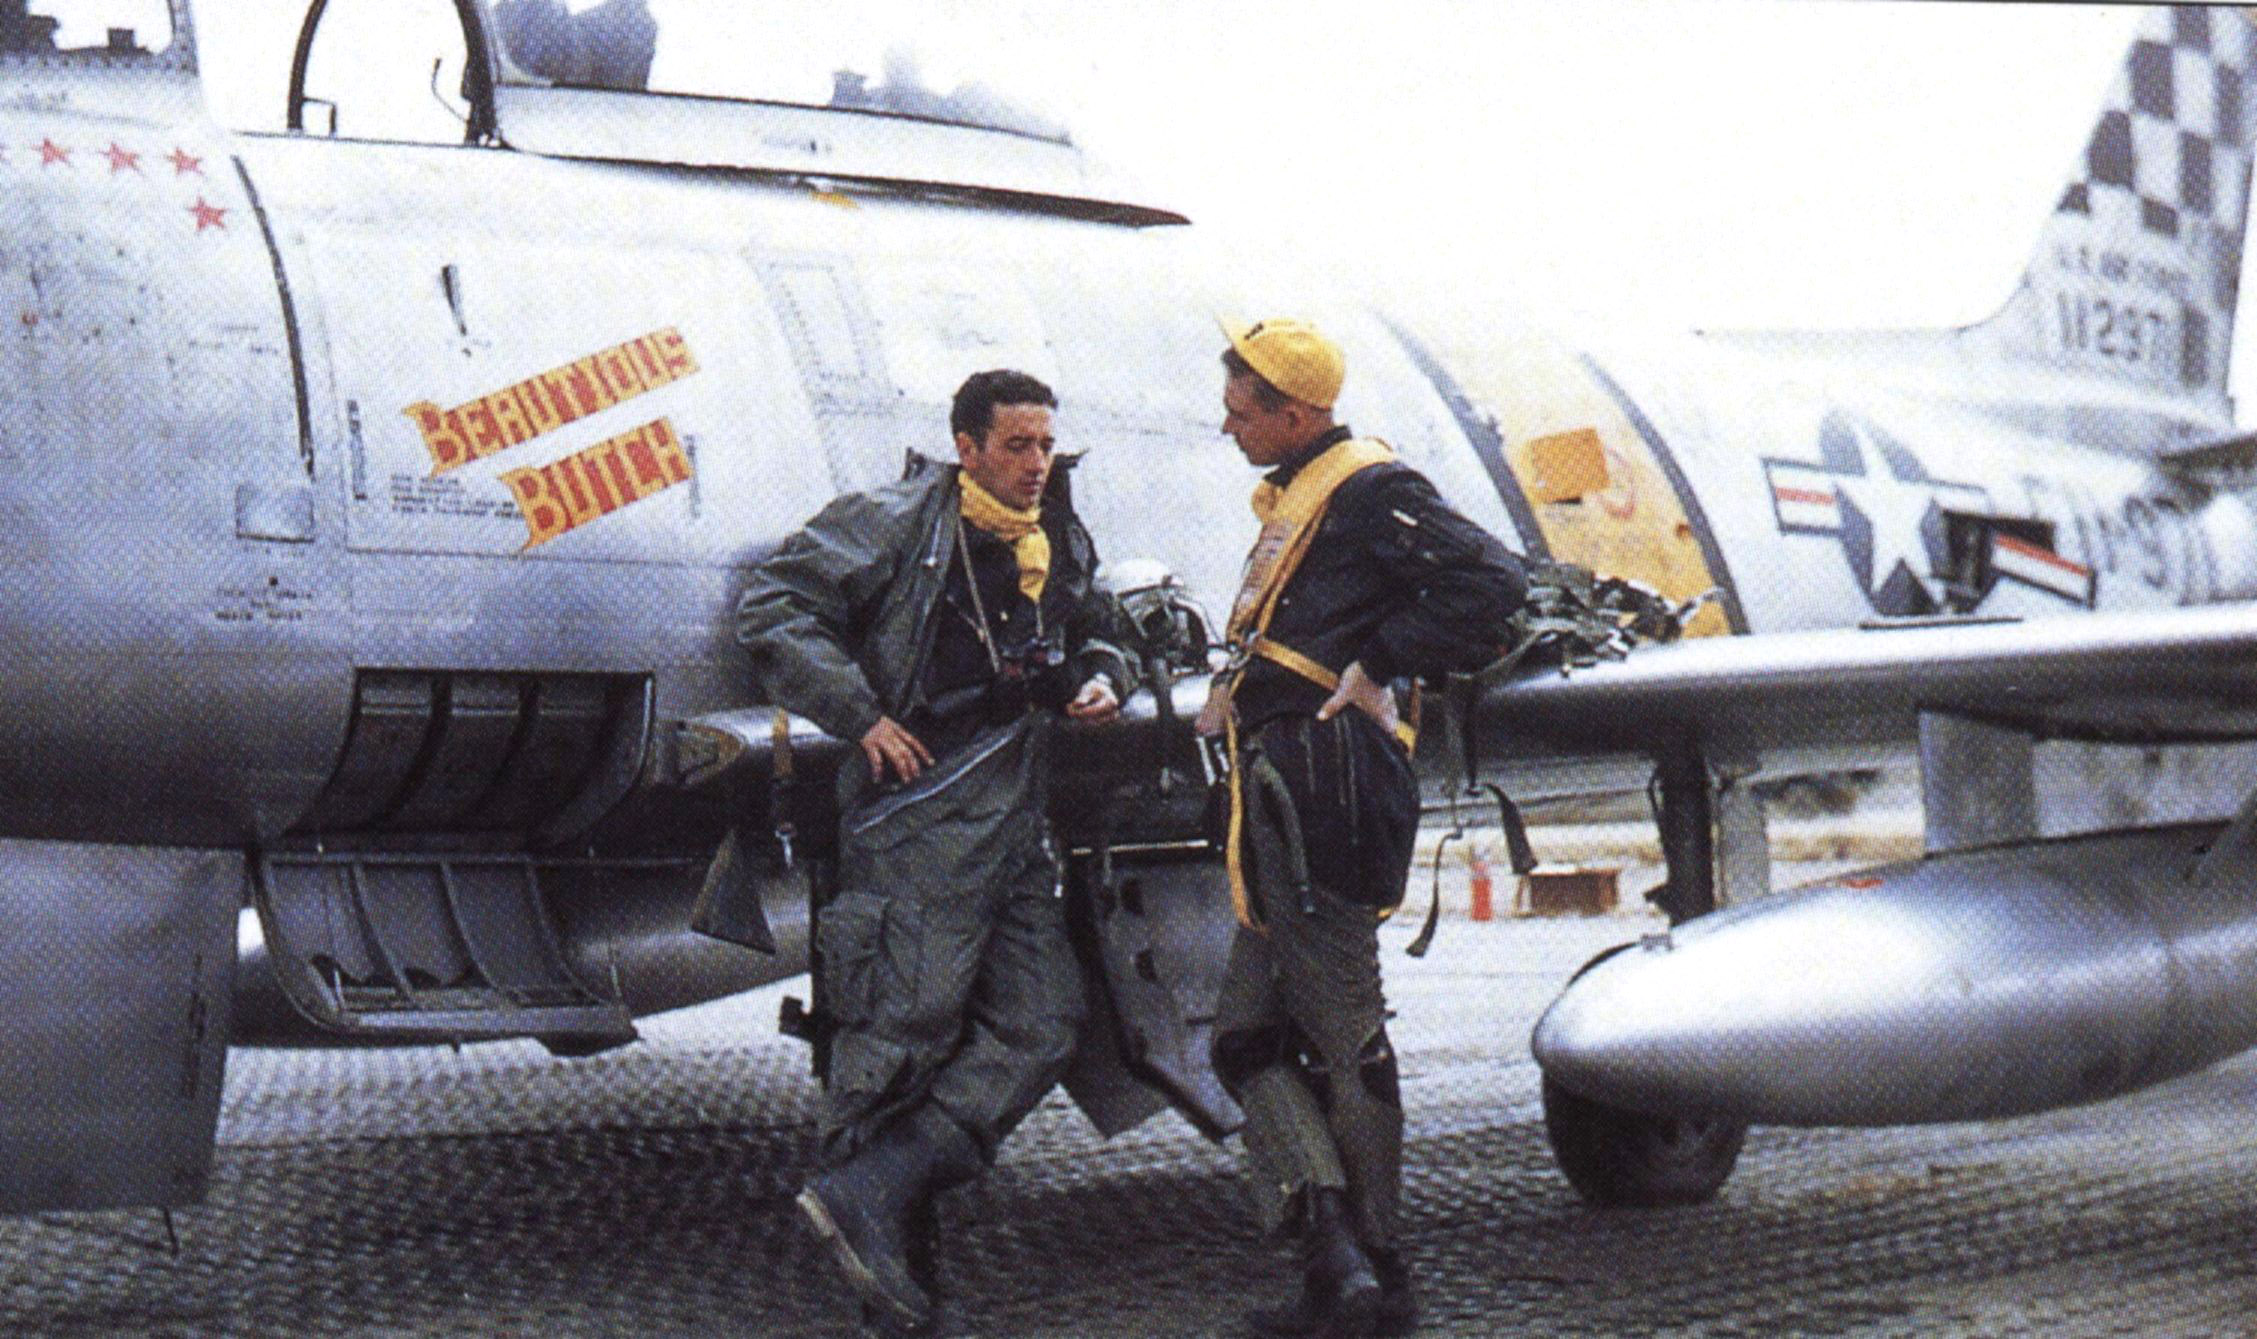 Captain Joseph C. McConnell, Jr., and Captain Harold Fischer, a double ace, with McConnell's second Sabre, F-86F-15-NA 51-12971, Korea, 1953. (U.S. Air Force). 